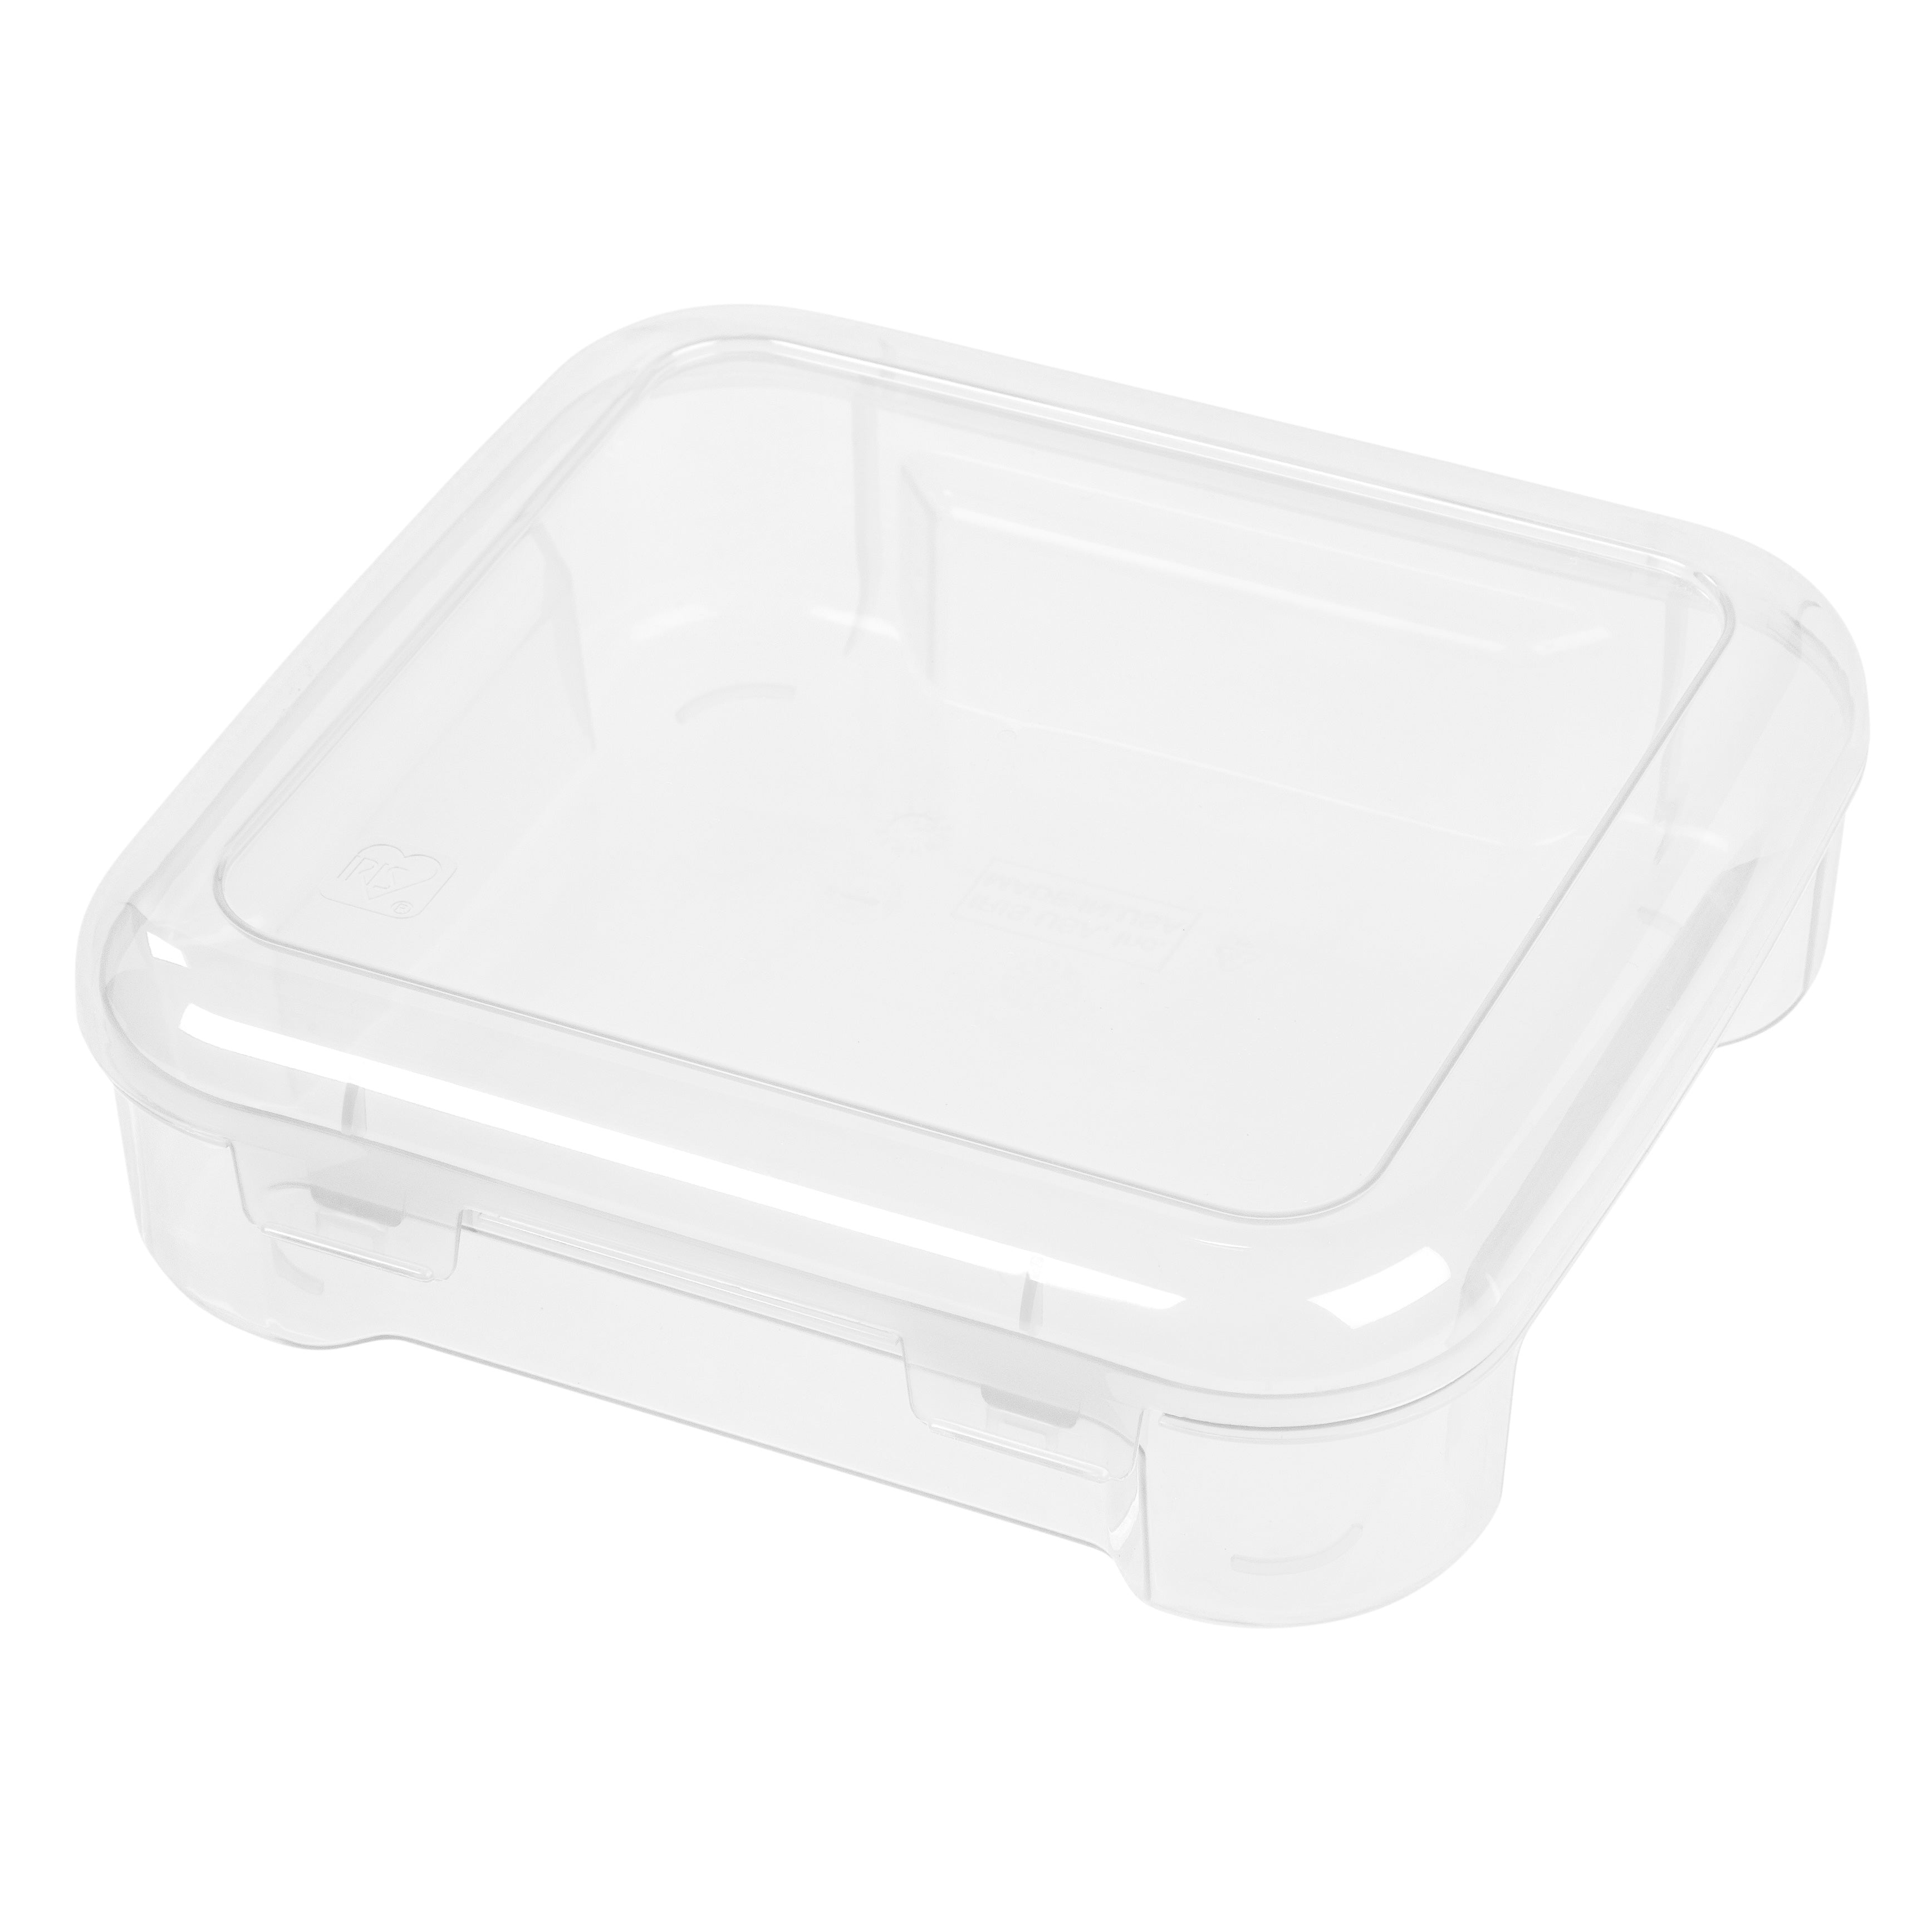 IRIS USA 6Pack 8.5 x 11 Portable Project Case Container with Snap-Tight  Latch, Clear, 6 Units - Kroger